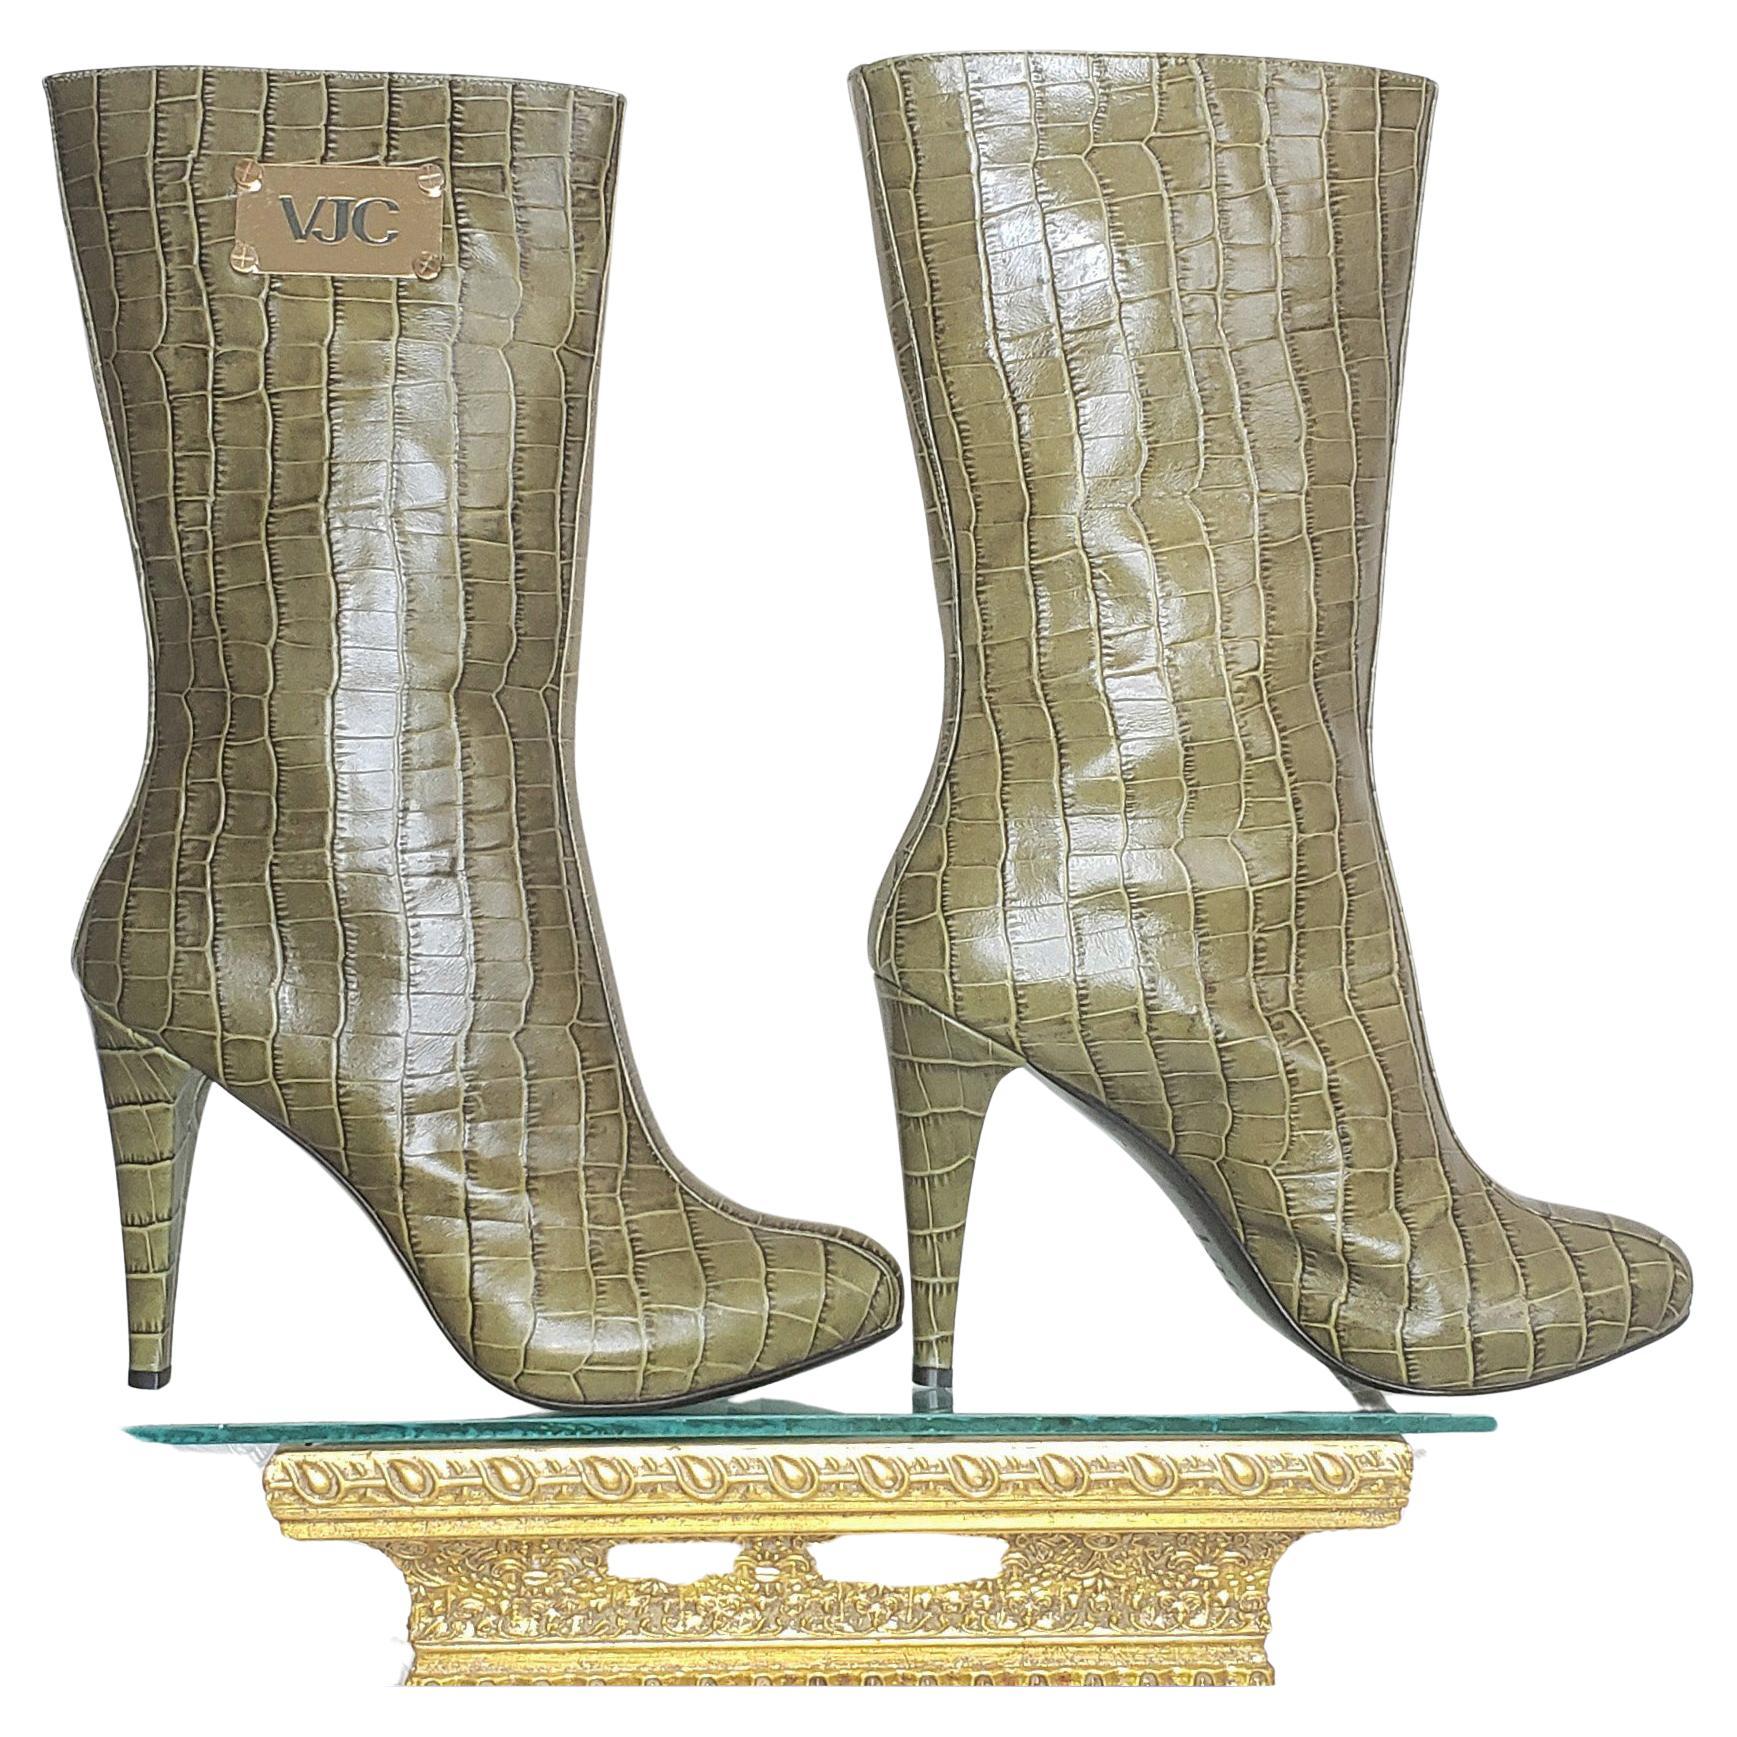 New VERSACE VJC GREEN CROC PRINT LEATHER BOOTS 39 - 9 For Sale